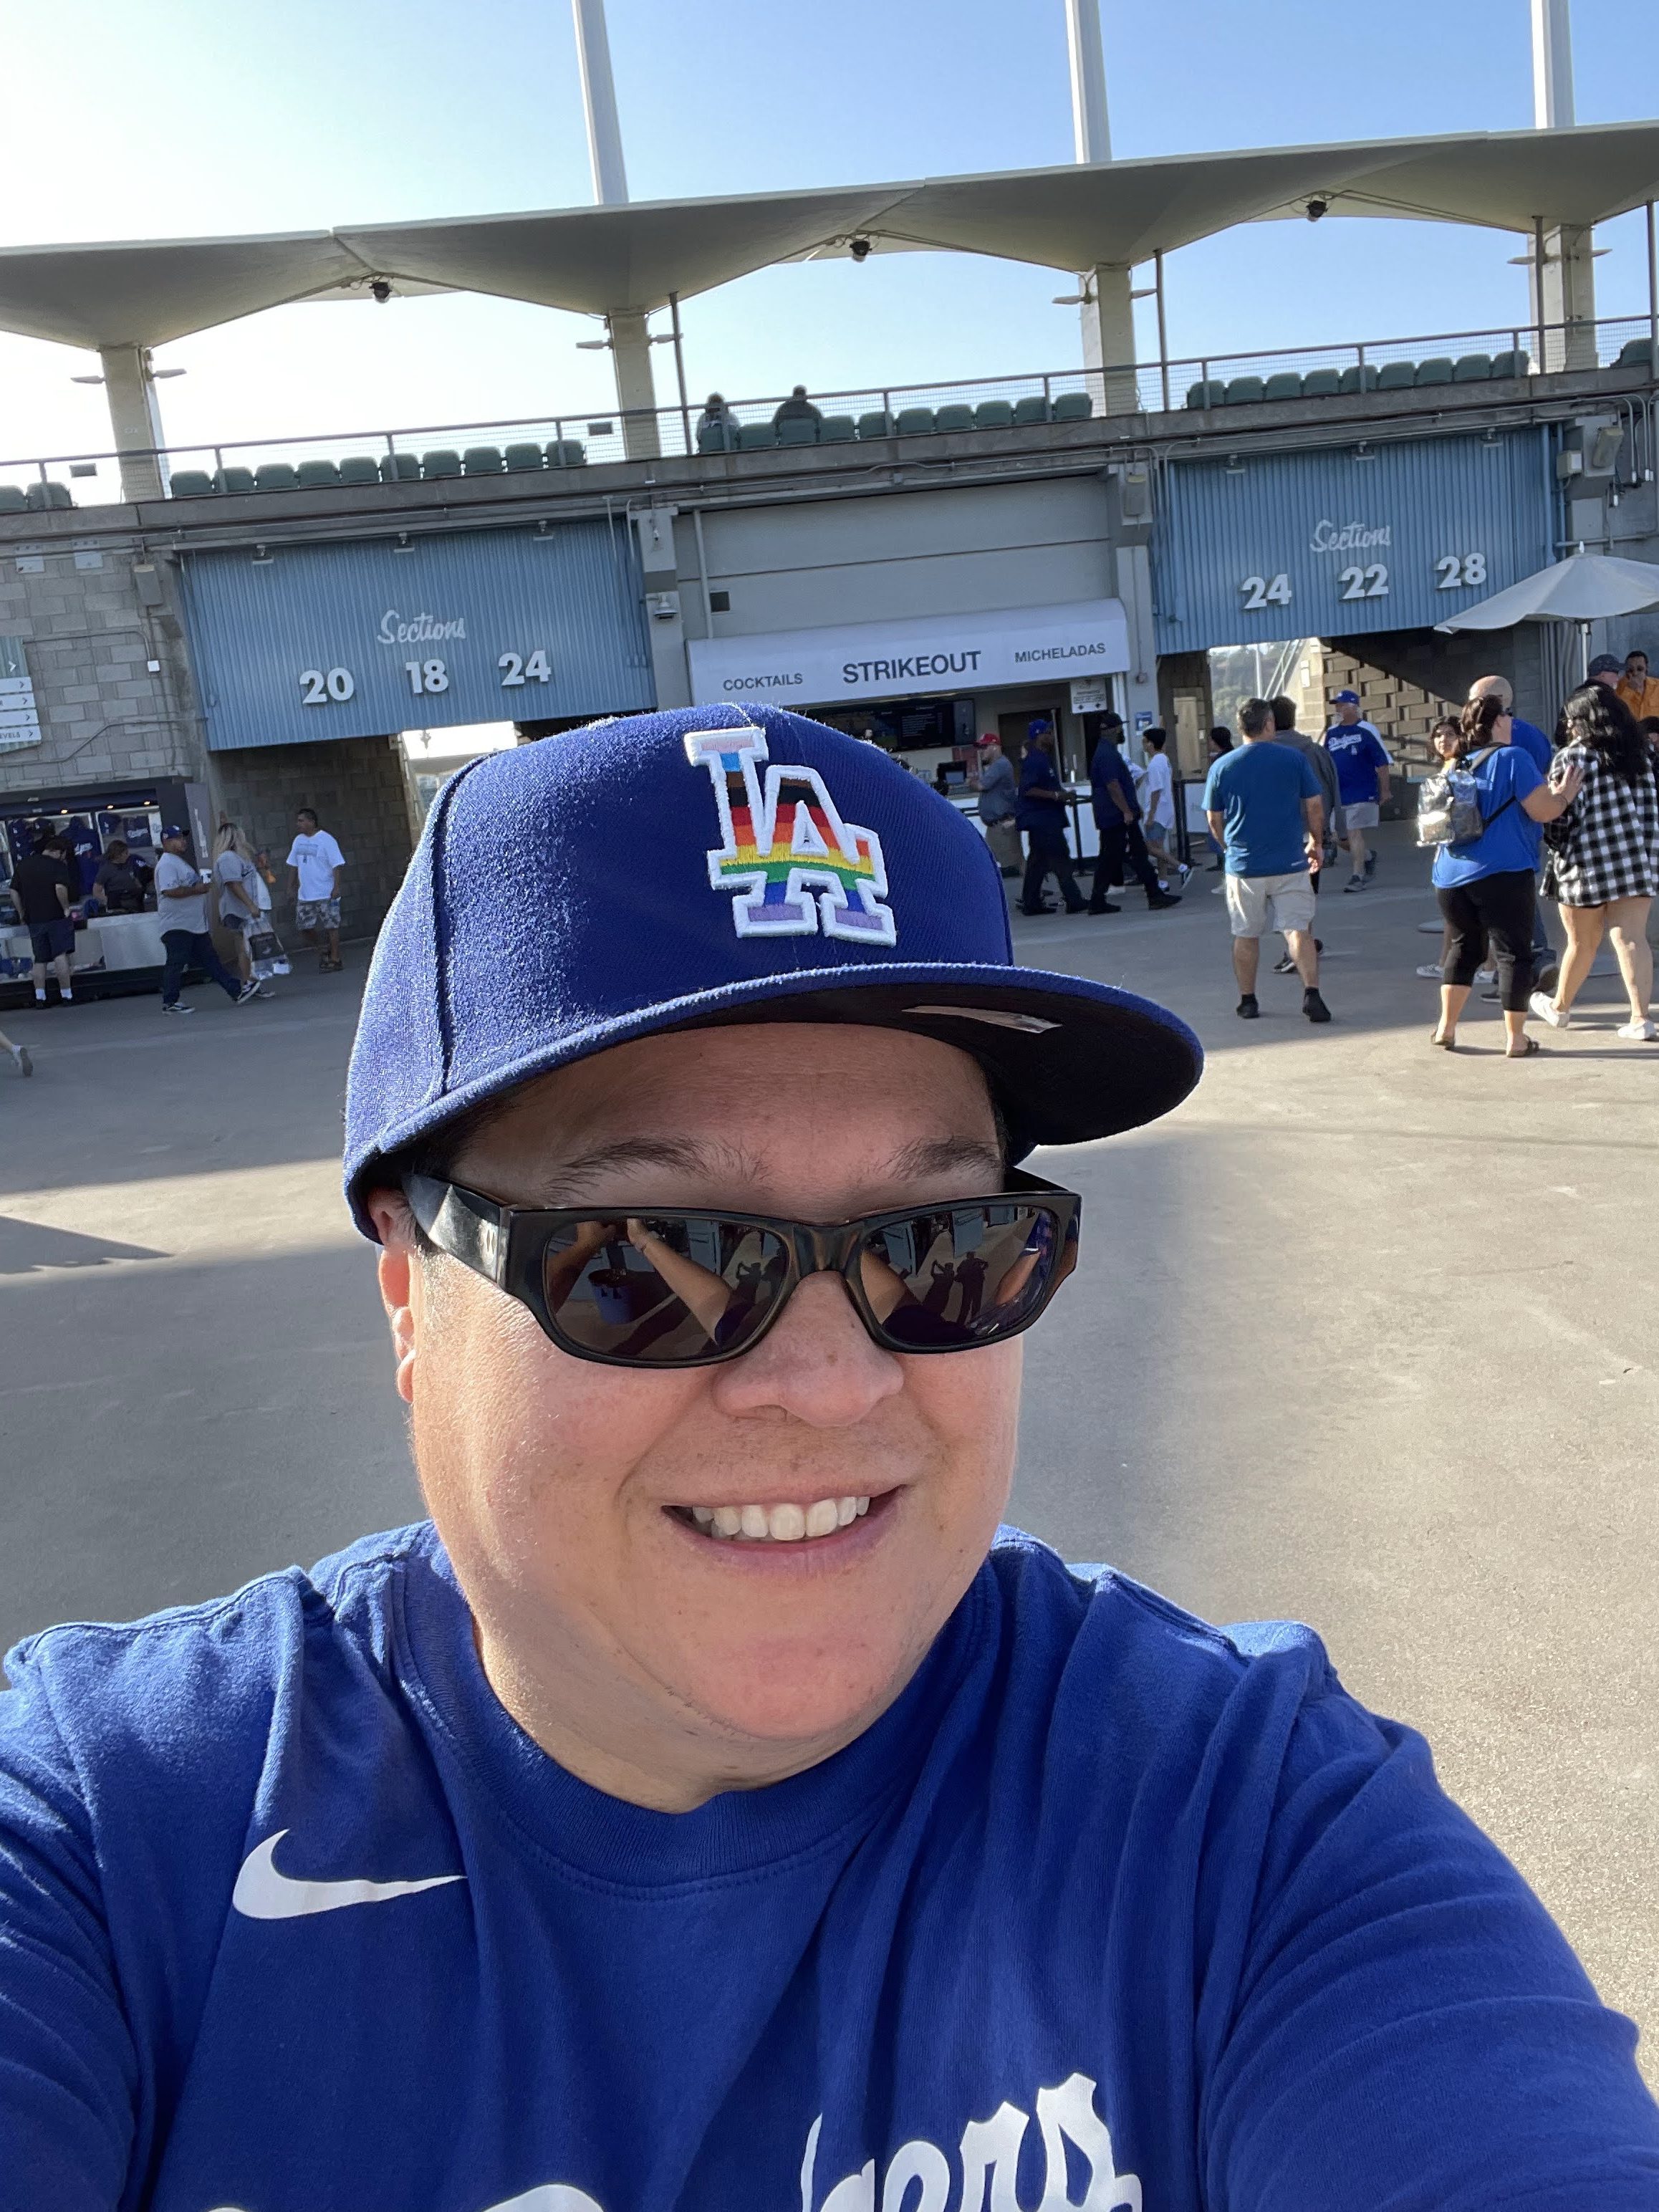 What happened on LA Dodgers Pride Night? That depended on source